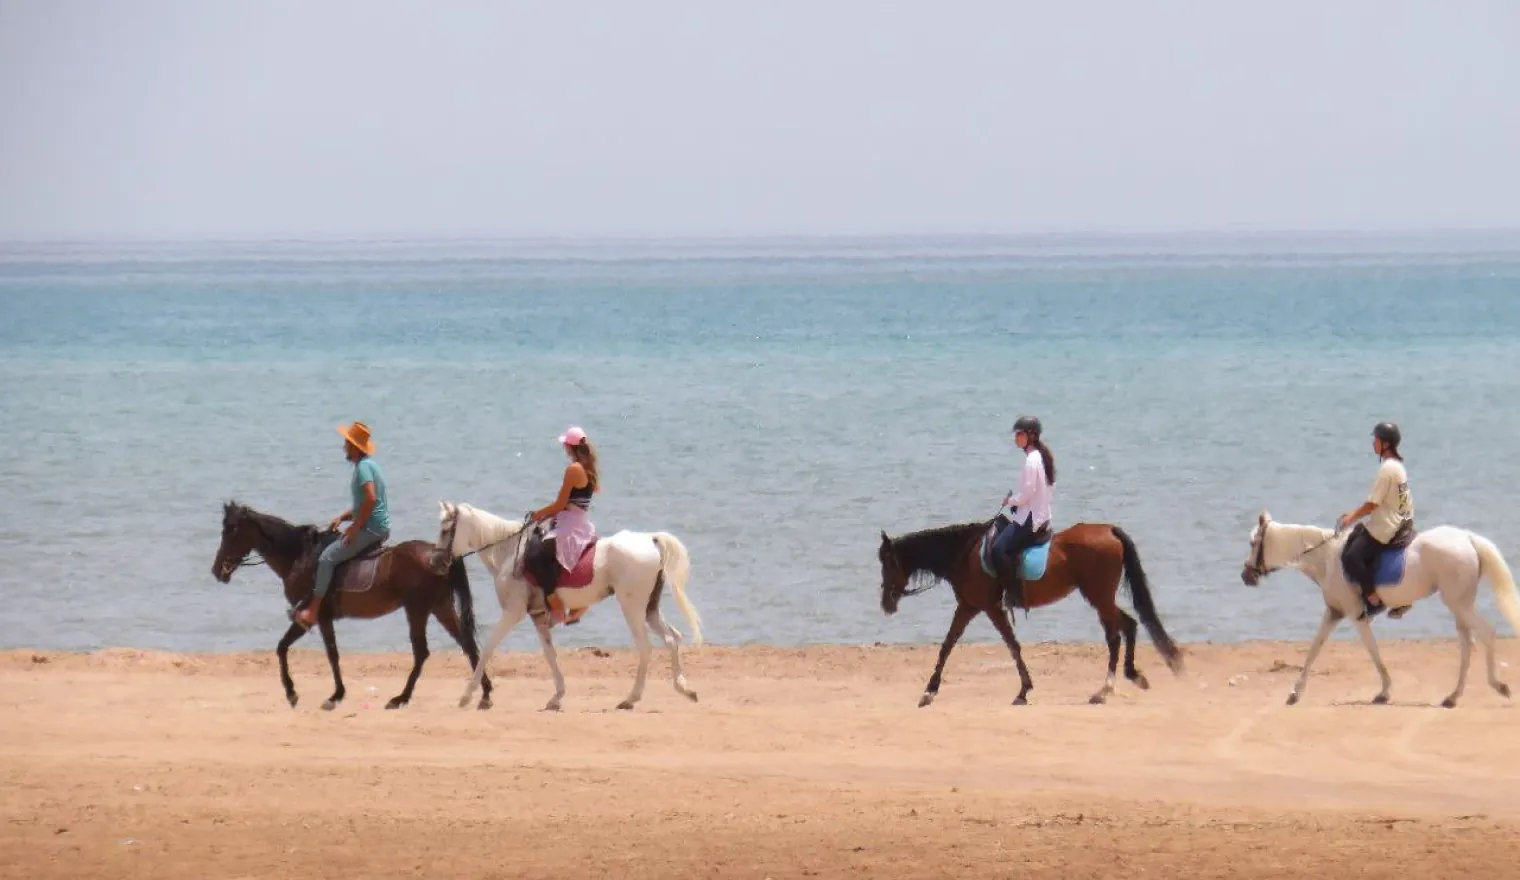 Group of people riding horses on the beach